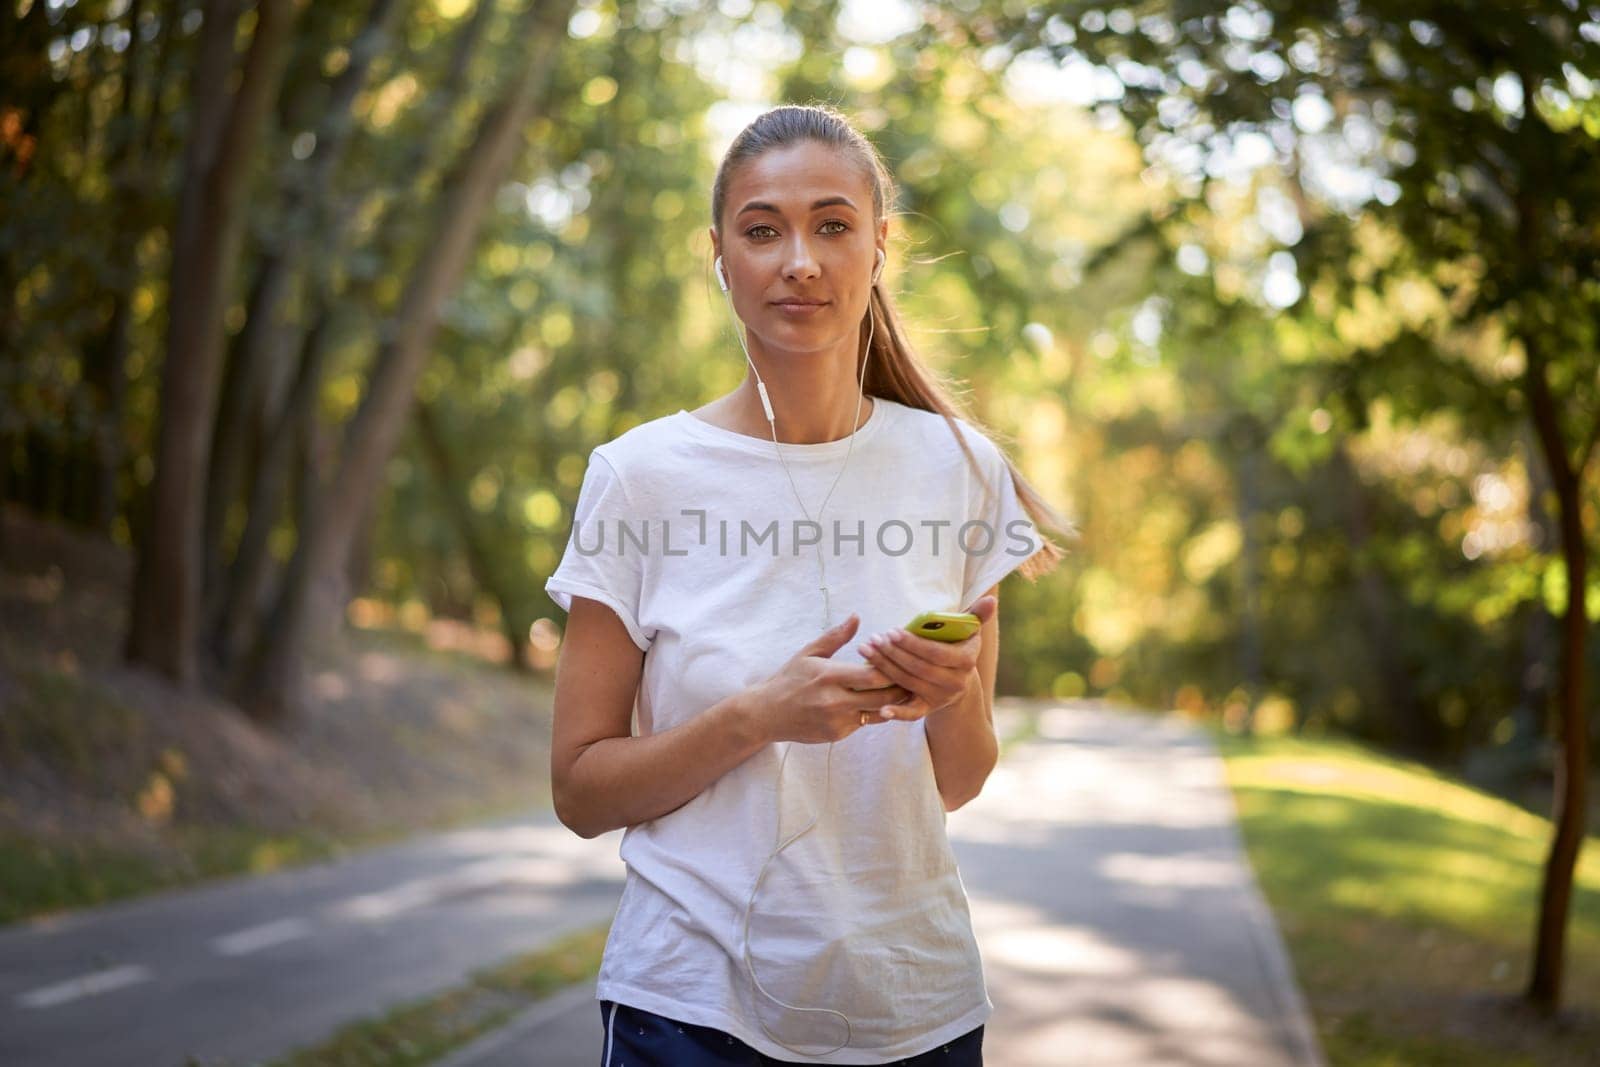 Portrait of confident female jogger listening to music through earphones while holding smartphone. Beautiful and fit woman runner in white shirt looking at camera, standing on road in park.